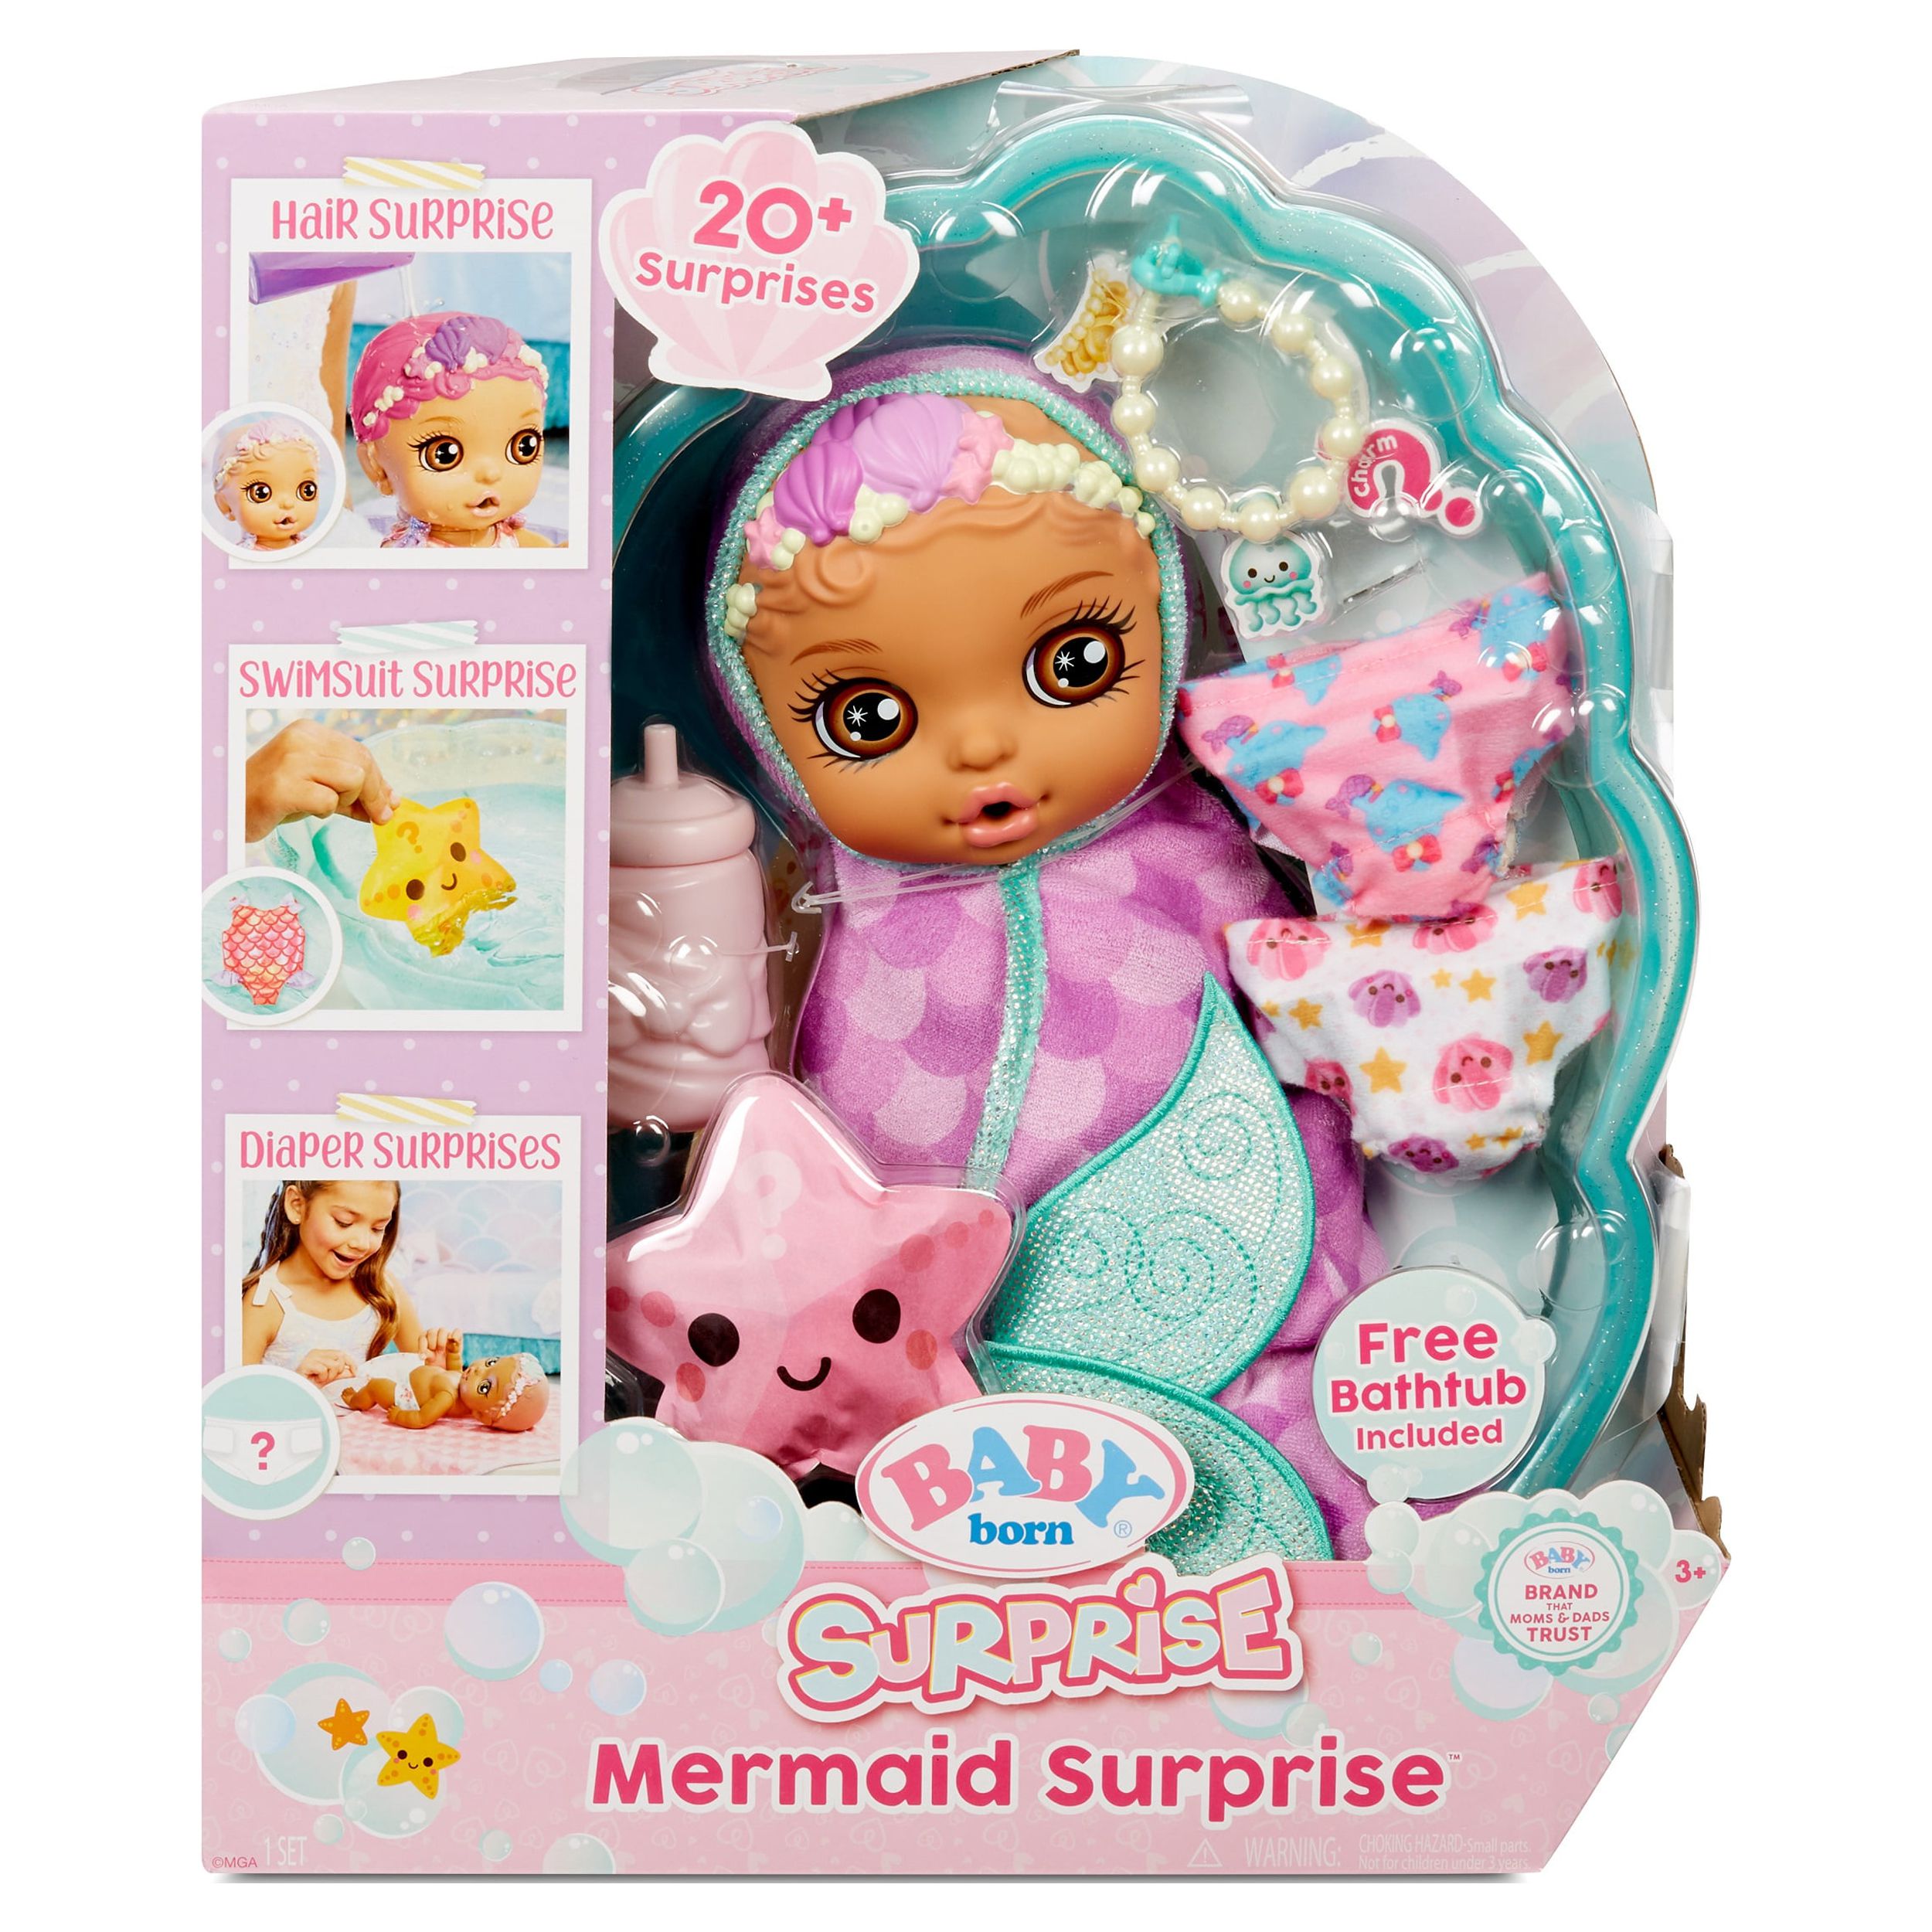 BABY born Surprise Mermaid Surprise – Baby Doll with Purple Towel and 20+ Surprises - image 3 of 7